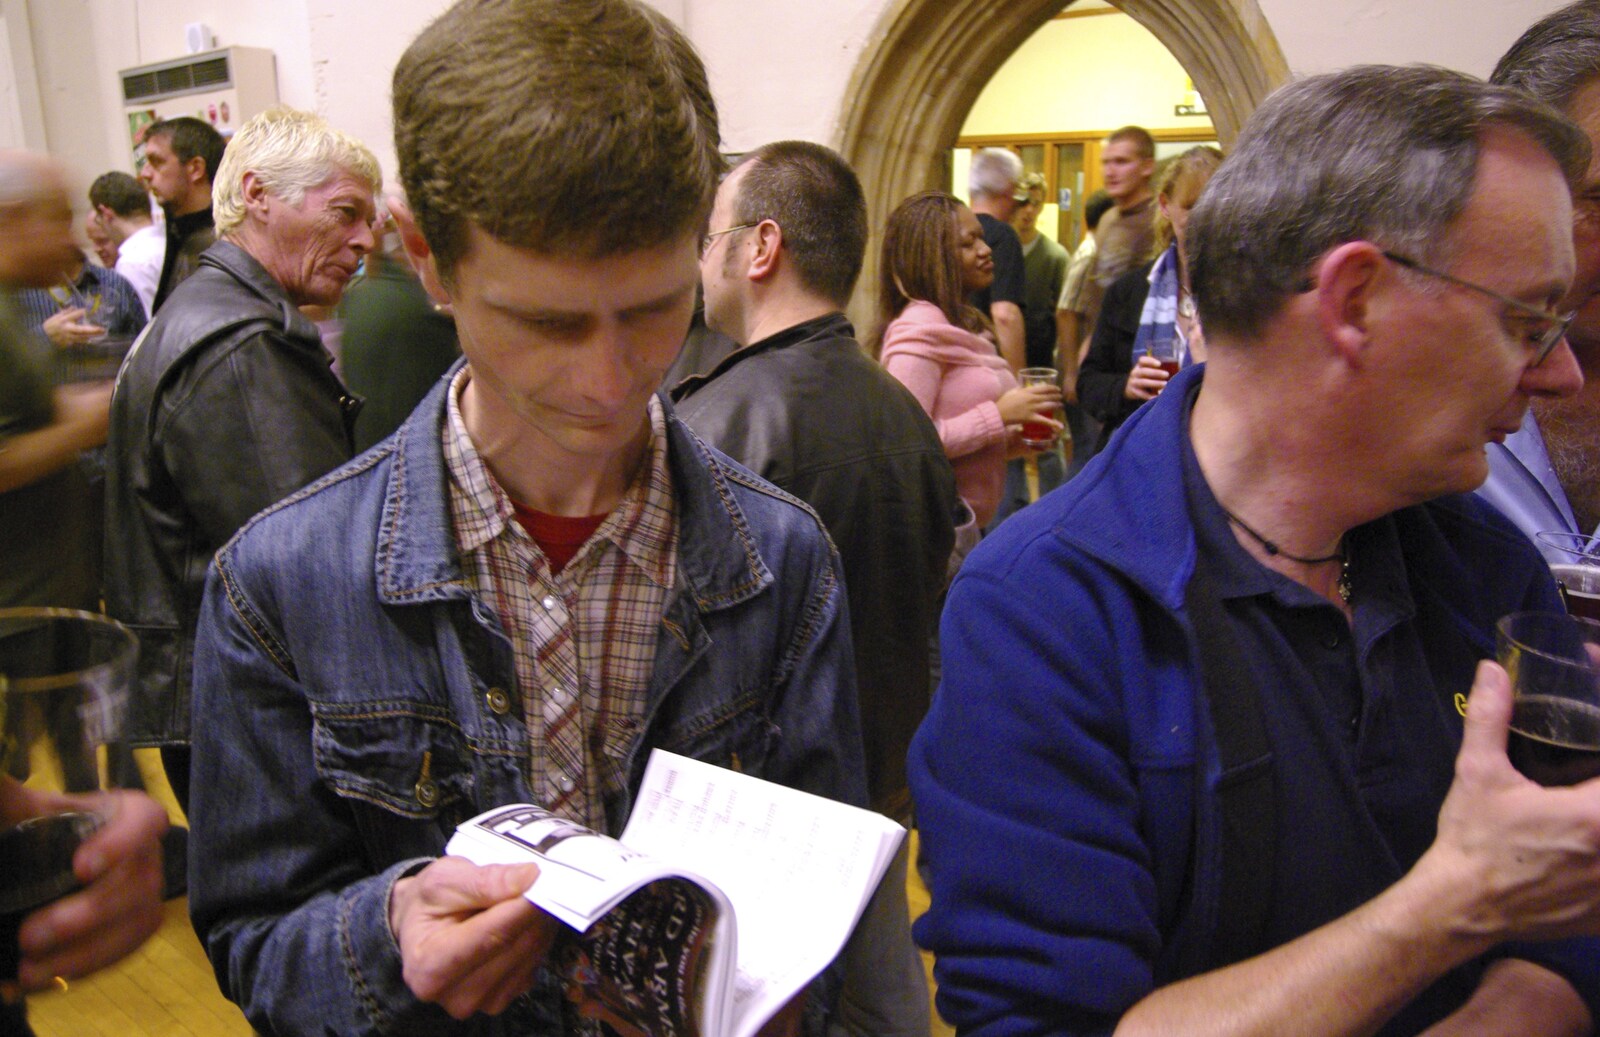 Ninja M reads the beer list from The Brome Swan at the 30th Norwich Beer Festival, Norfolk - 24th October 2007